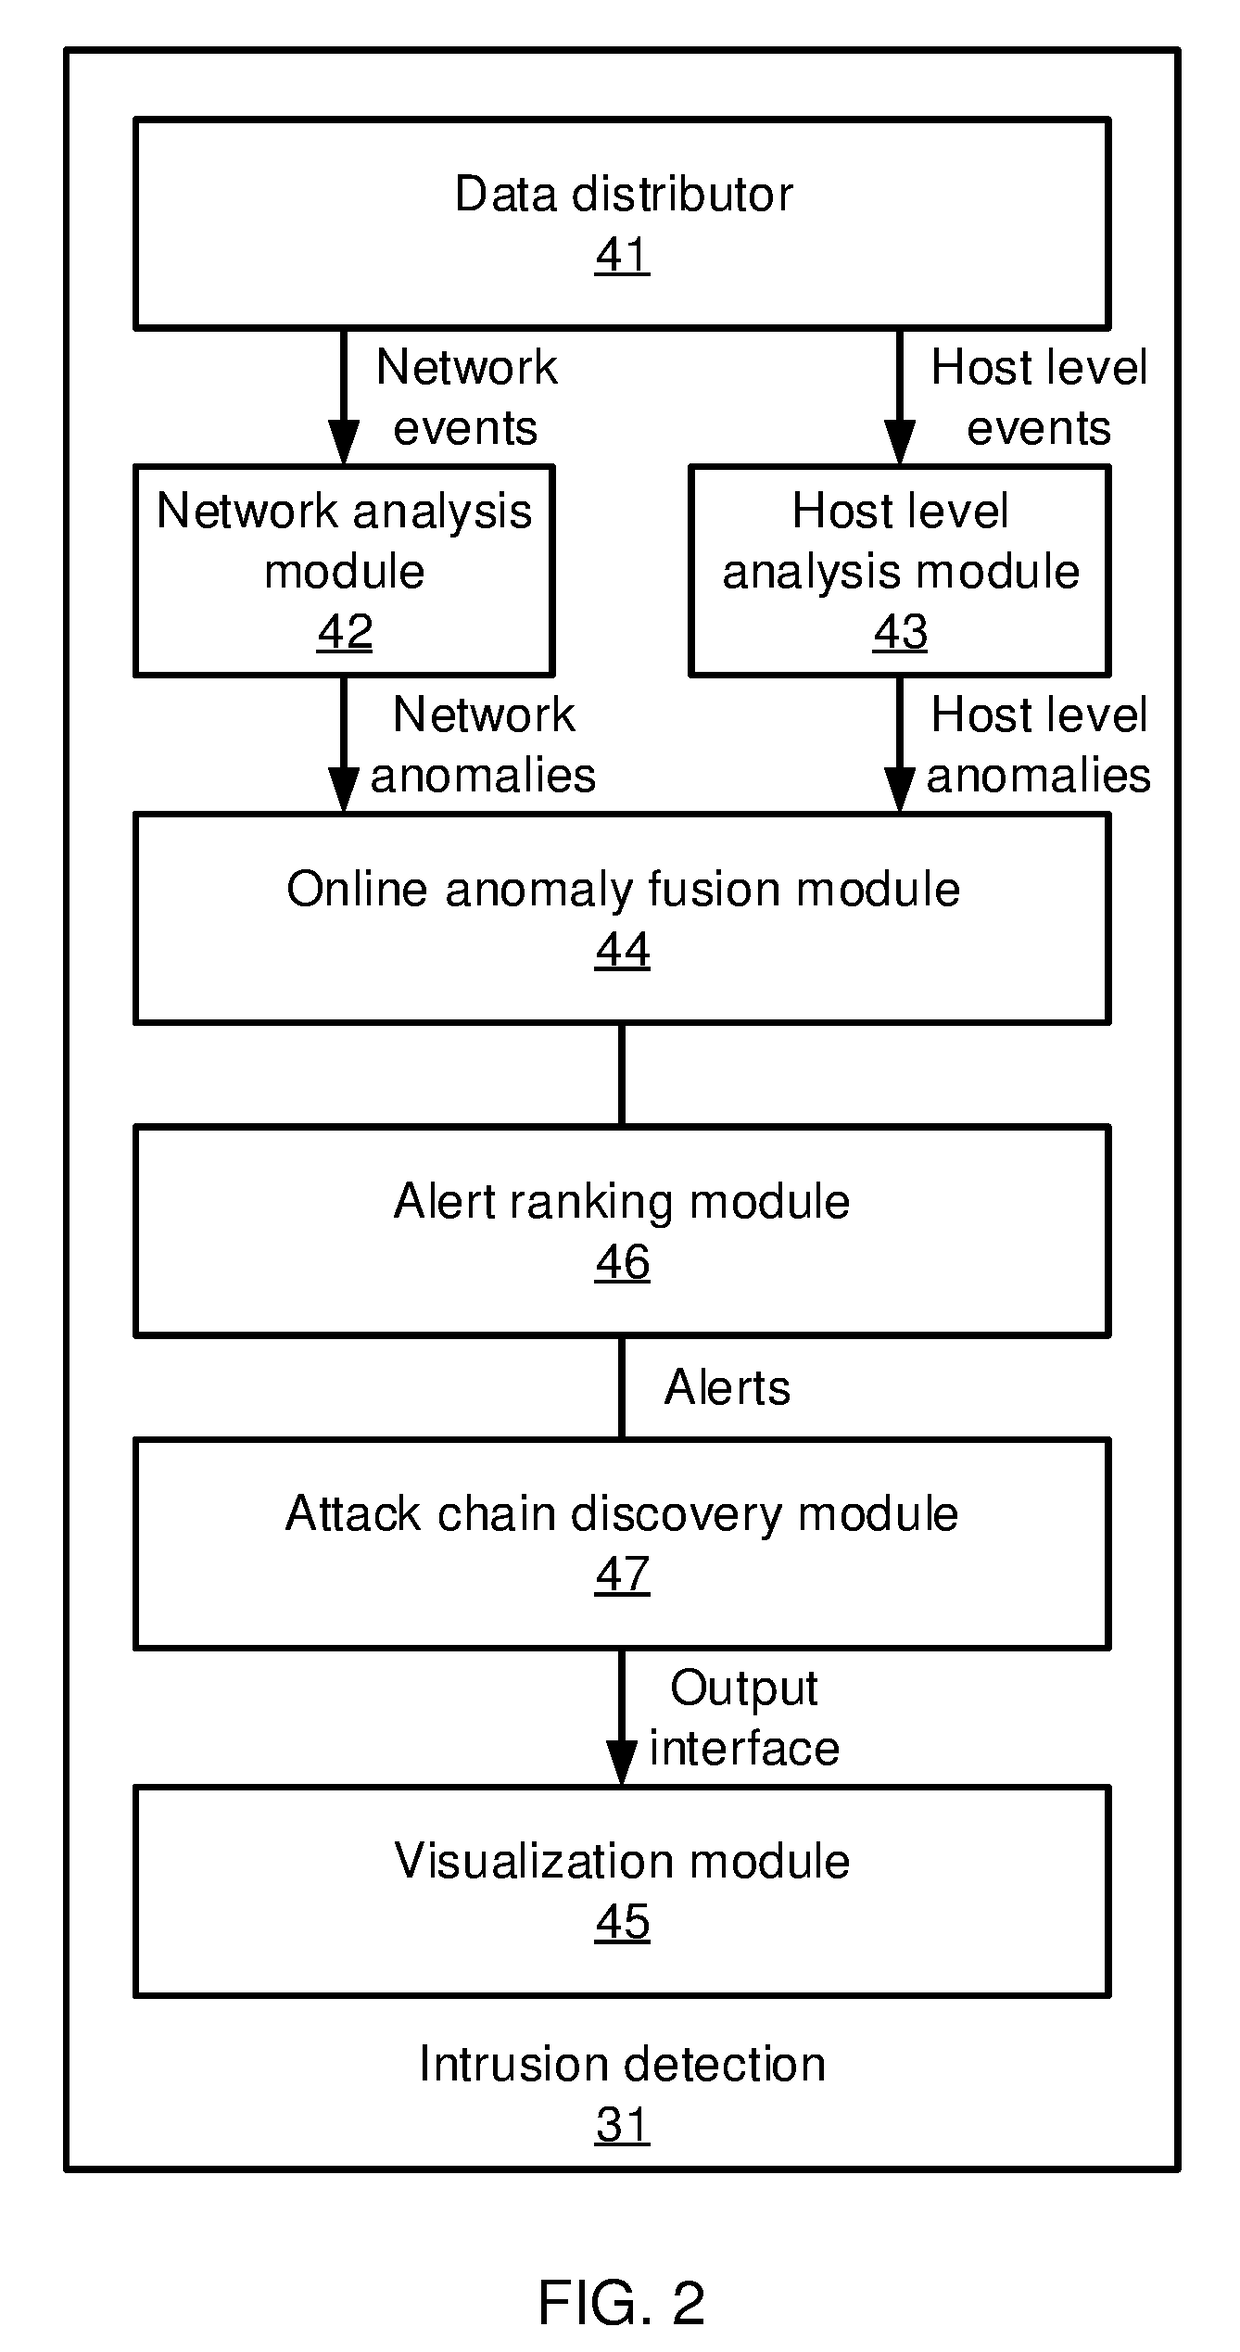 Graph-based attack chain discovery in enterprise security systems